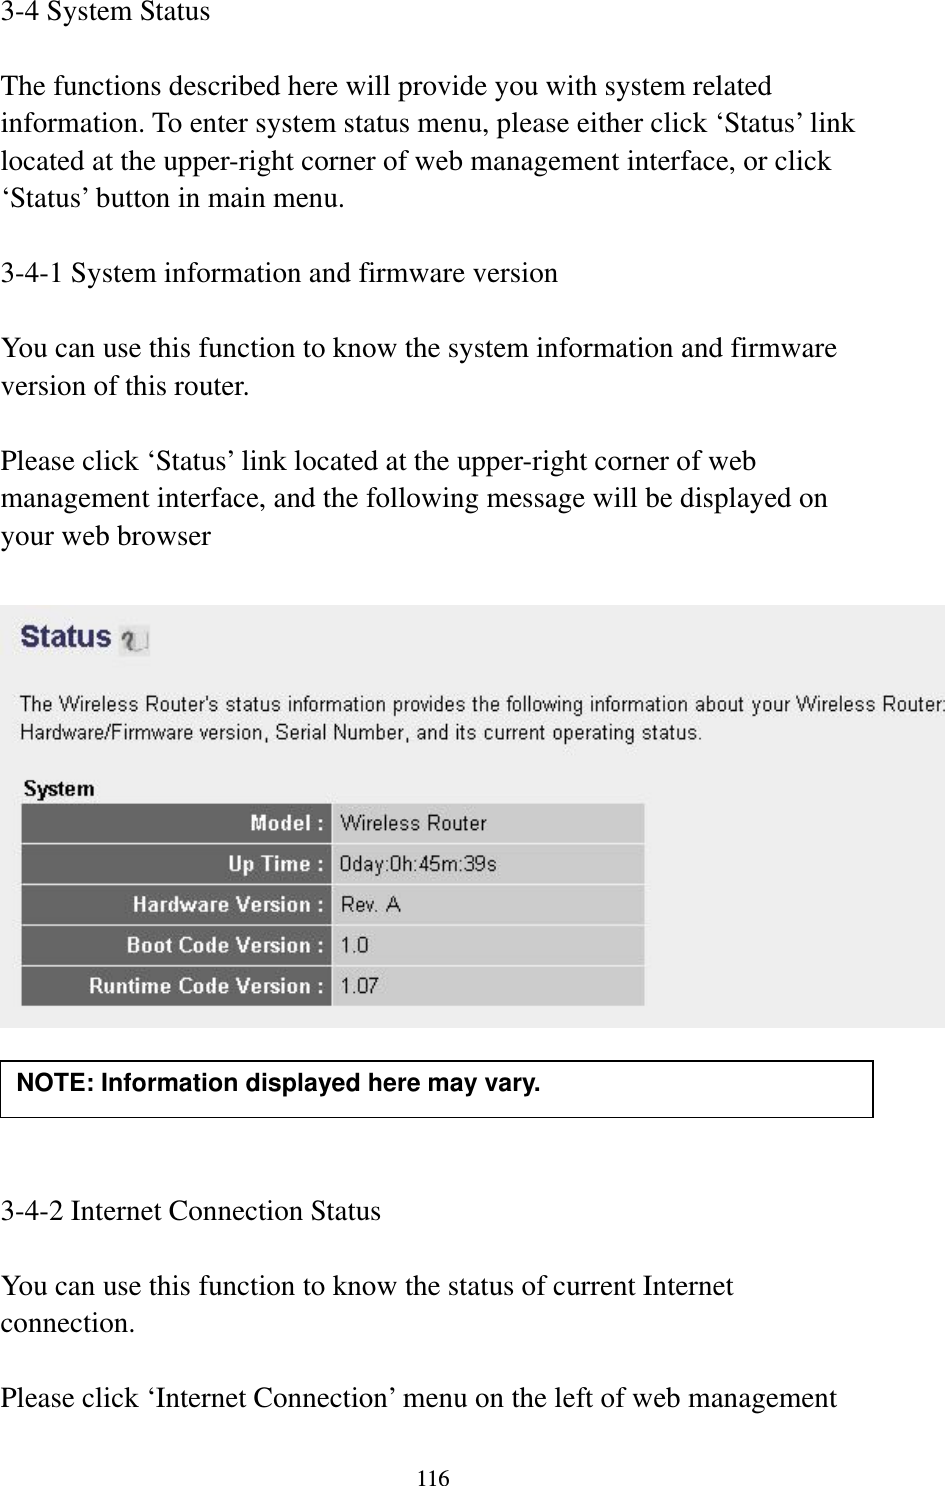 116 3-4 System Status  The functions described here will provide you with system related information. To enter system status menu, please either click ‘Status’ link located at the upper-right corner of web management interface, or click ‘Status’ button in main menu.  3-4-1 System information and firmware version  You can use this function to know the system information and firmware version of this router.  Please click ‘Status’ link located at the upper-right corner of web management interface, and the following message will be displayed on your web browser       3-4-2 Internet Connection Status  You can use this function to know the status of current Internet connection.  Please click ‘Internet Connection’ menu on the left of web management NOTE: Information displayed here may vary. 